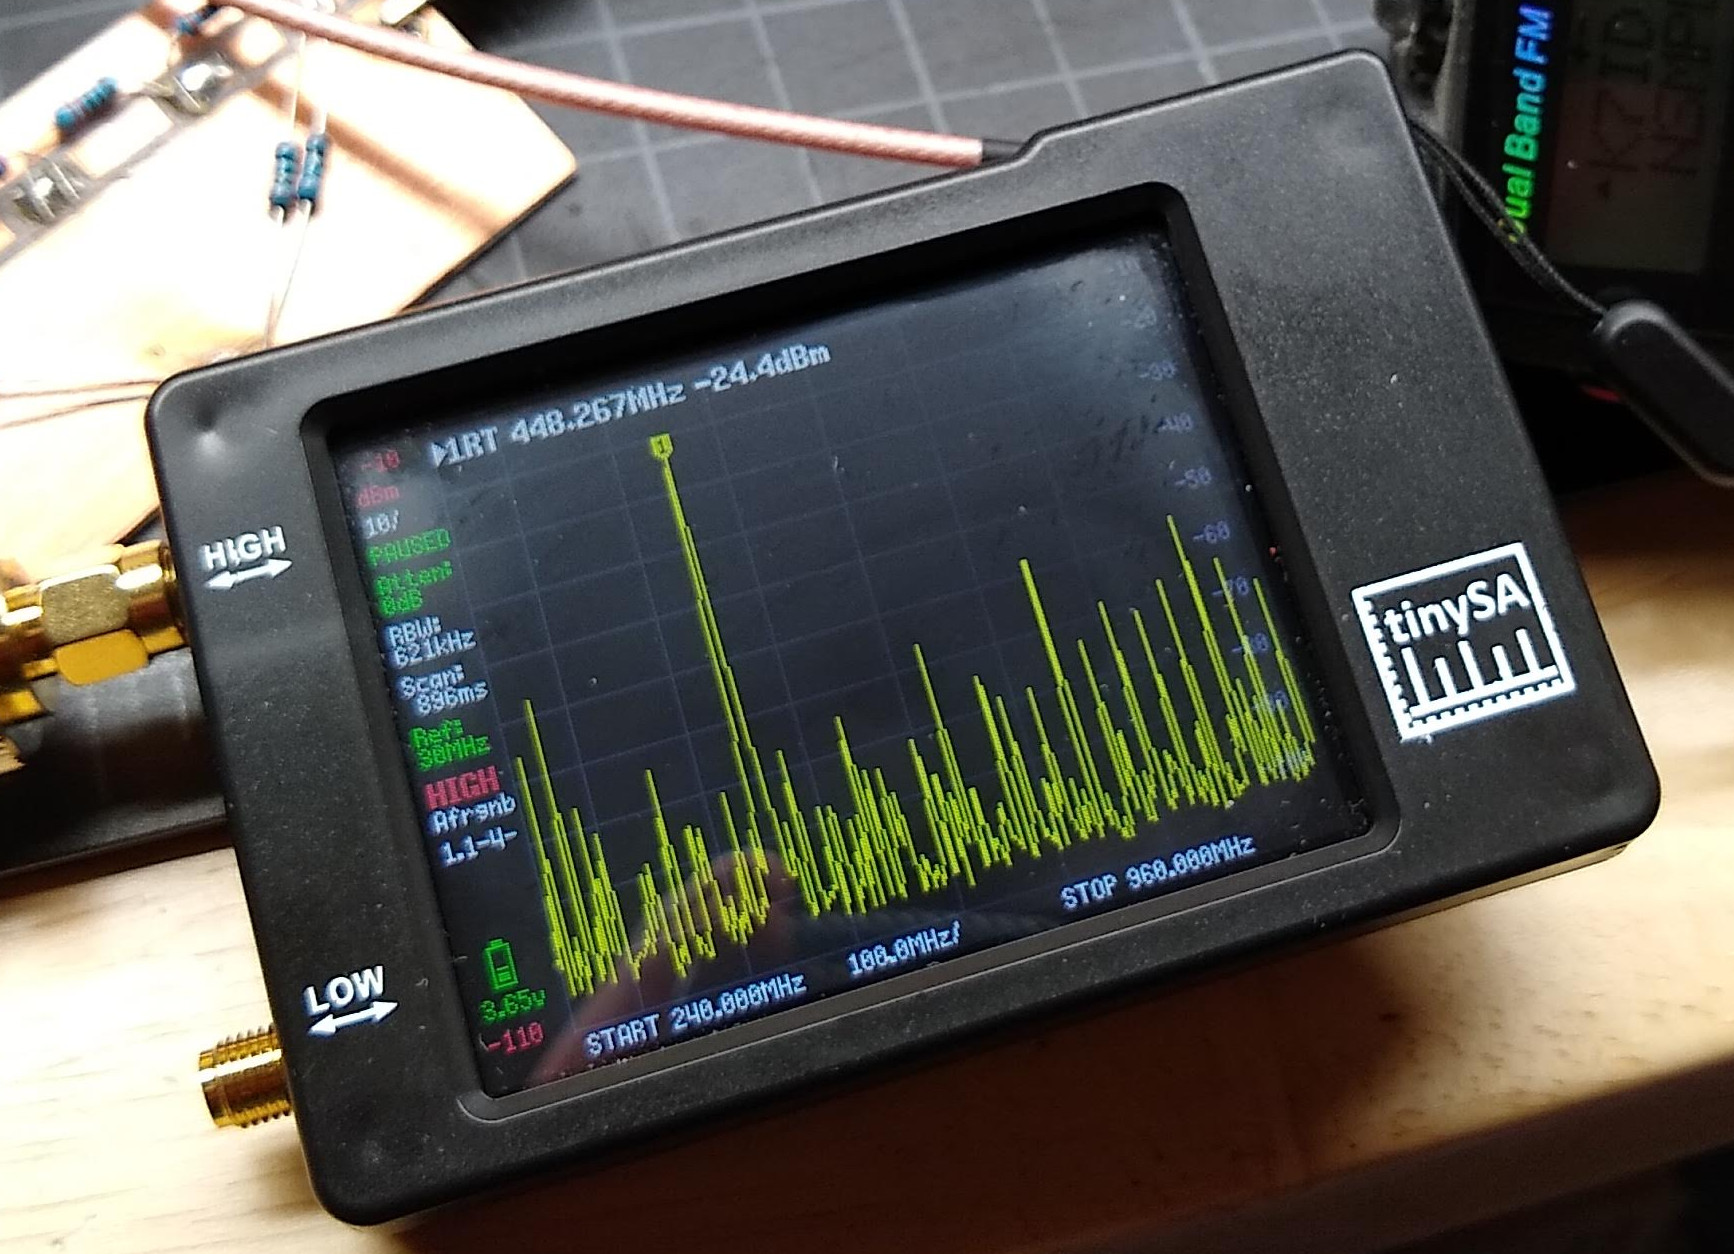 Product Review: The TinySA, A Shirt-Pocket Sized Spectrum Analyzer |  Hackaday